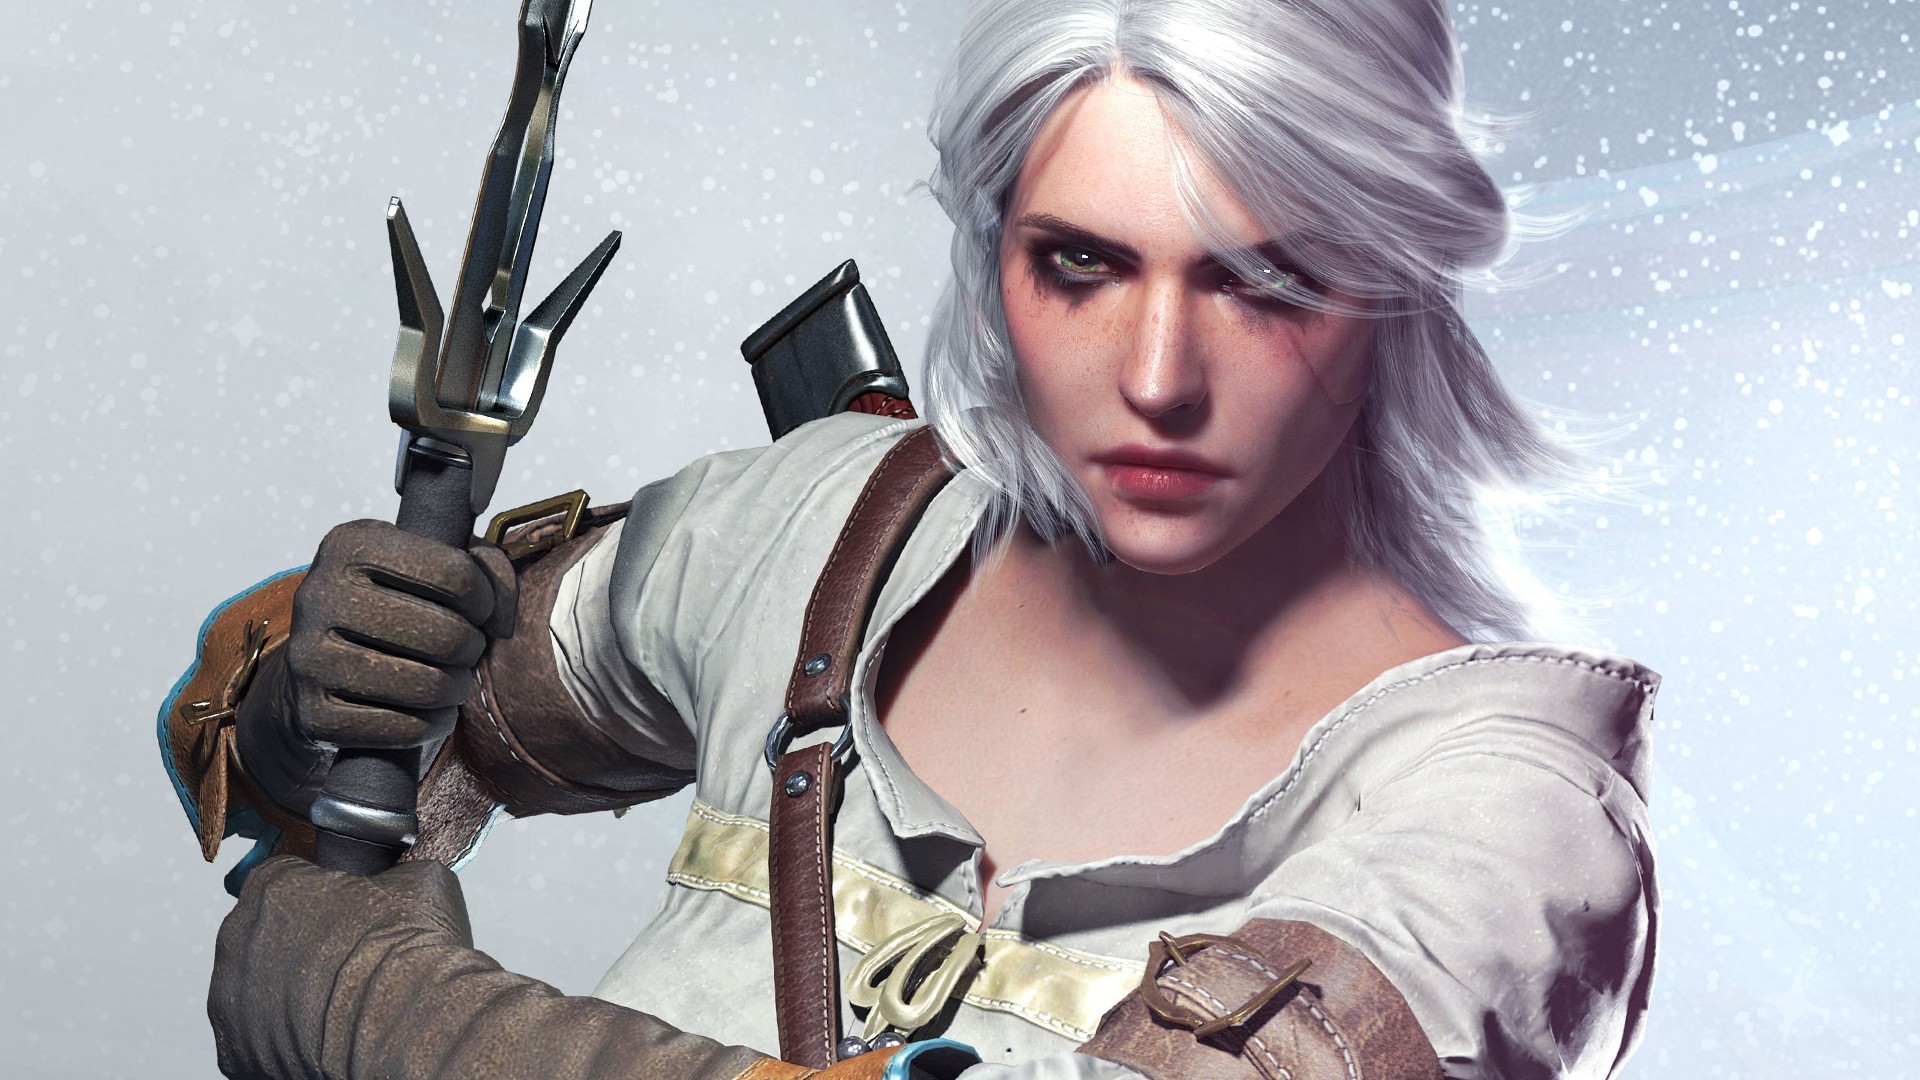 General 1920x1080 The Witcher 3: Wild Hunt Cirilla Fiona Elen Riannon video games The Witcher fantasy girl video game girls women looking at viewer CD Projekt RED PC gaming video game art